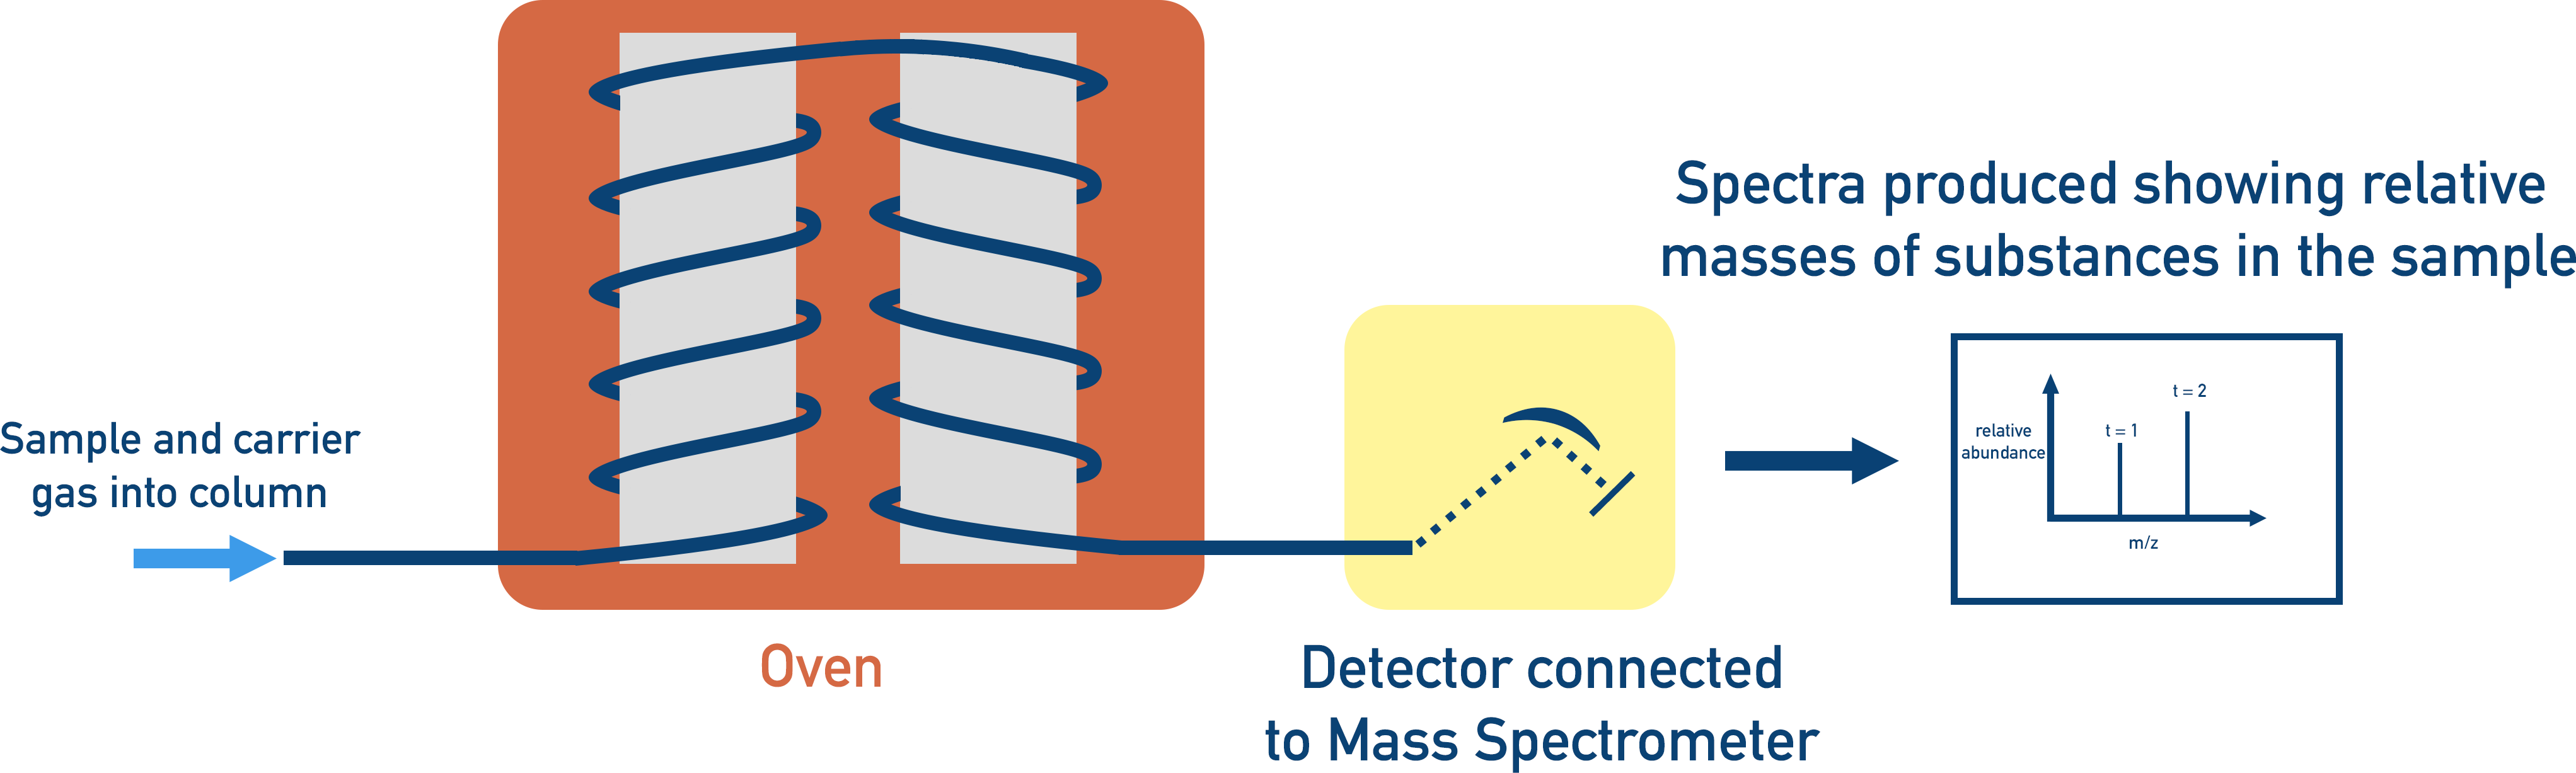 Gas Chromatography Mass Spectrometry oven detector spectra